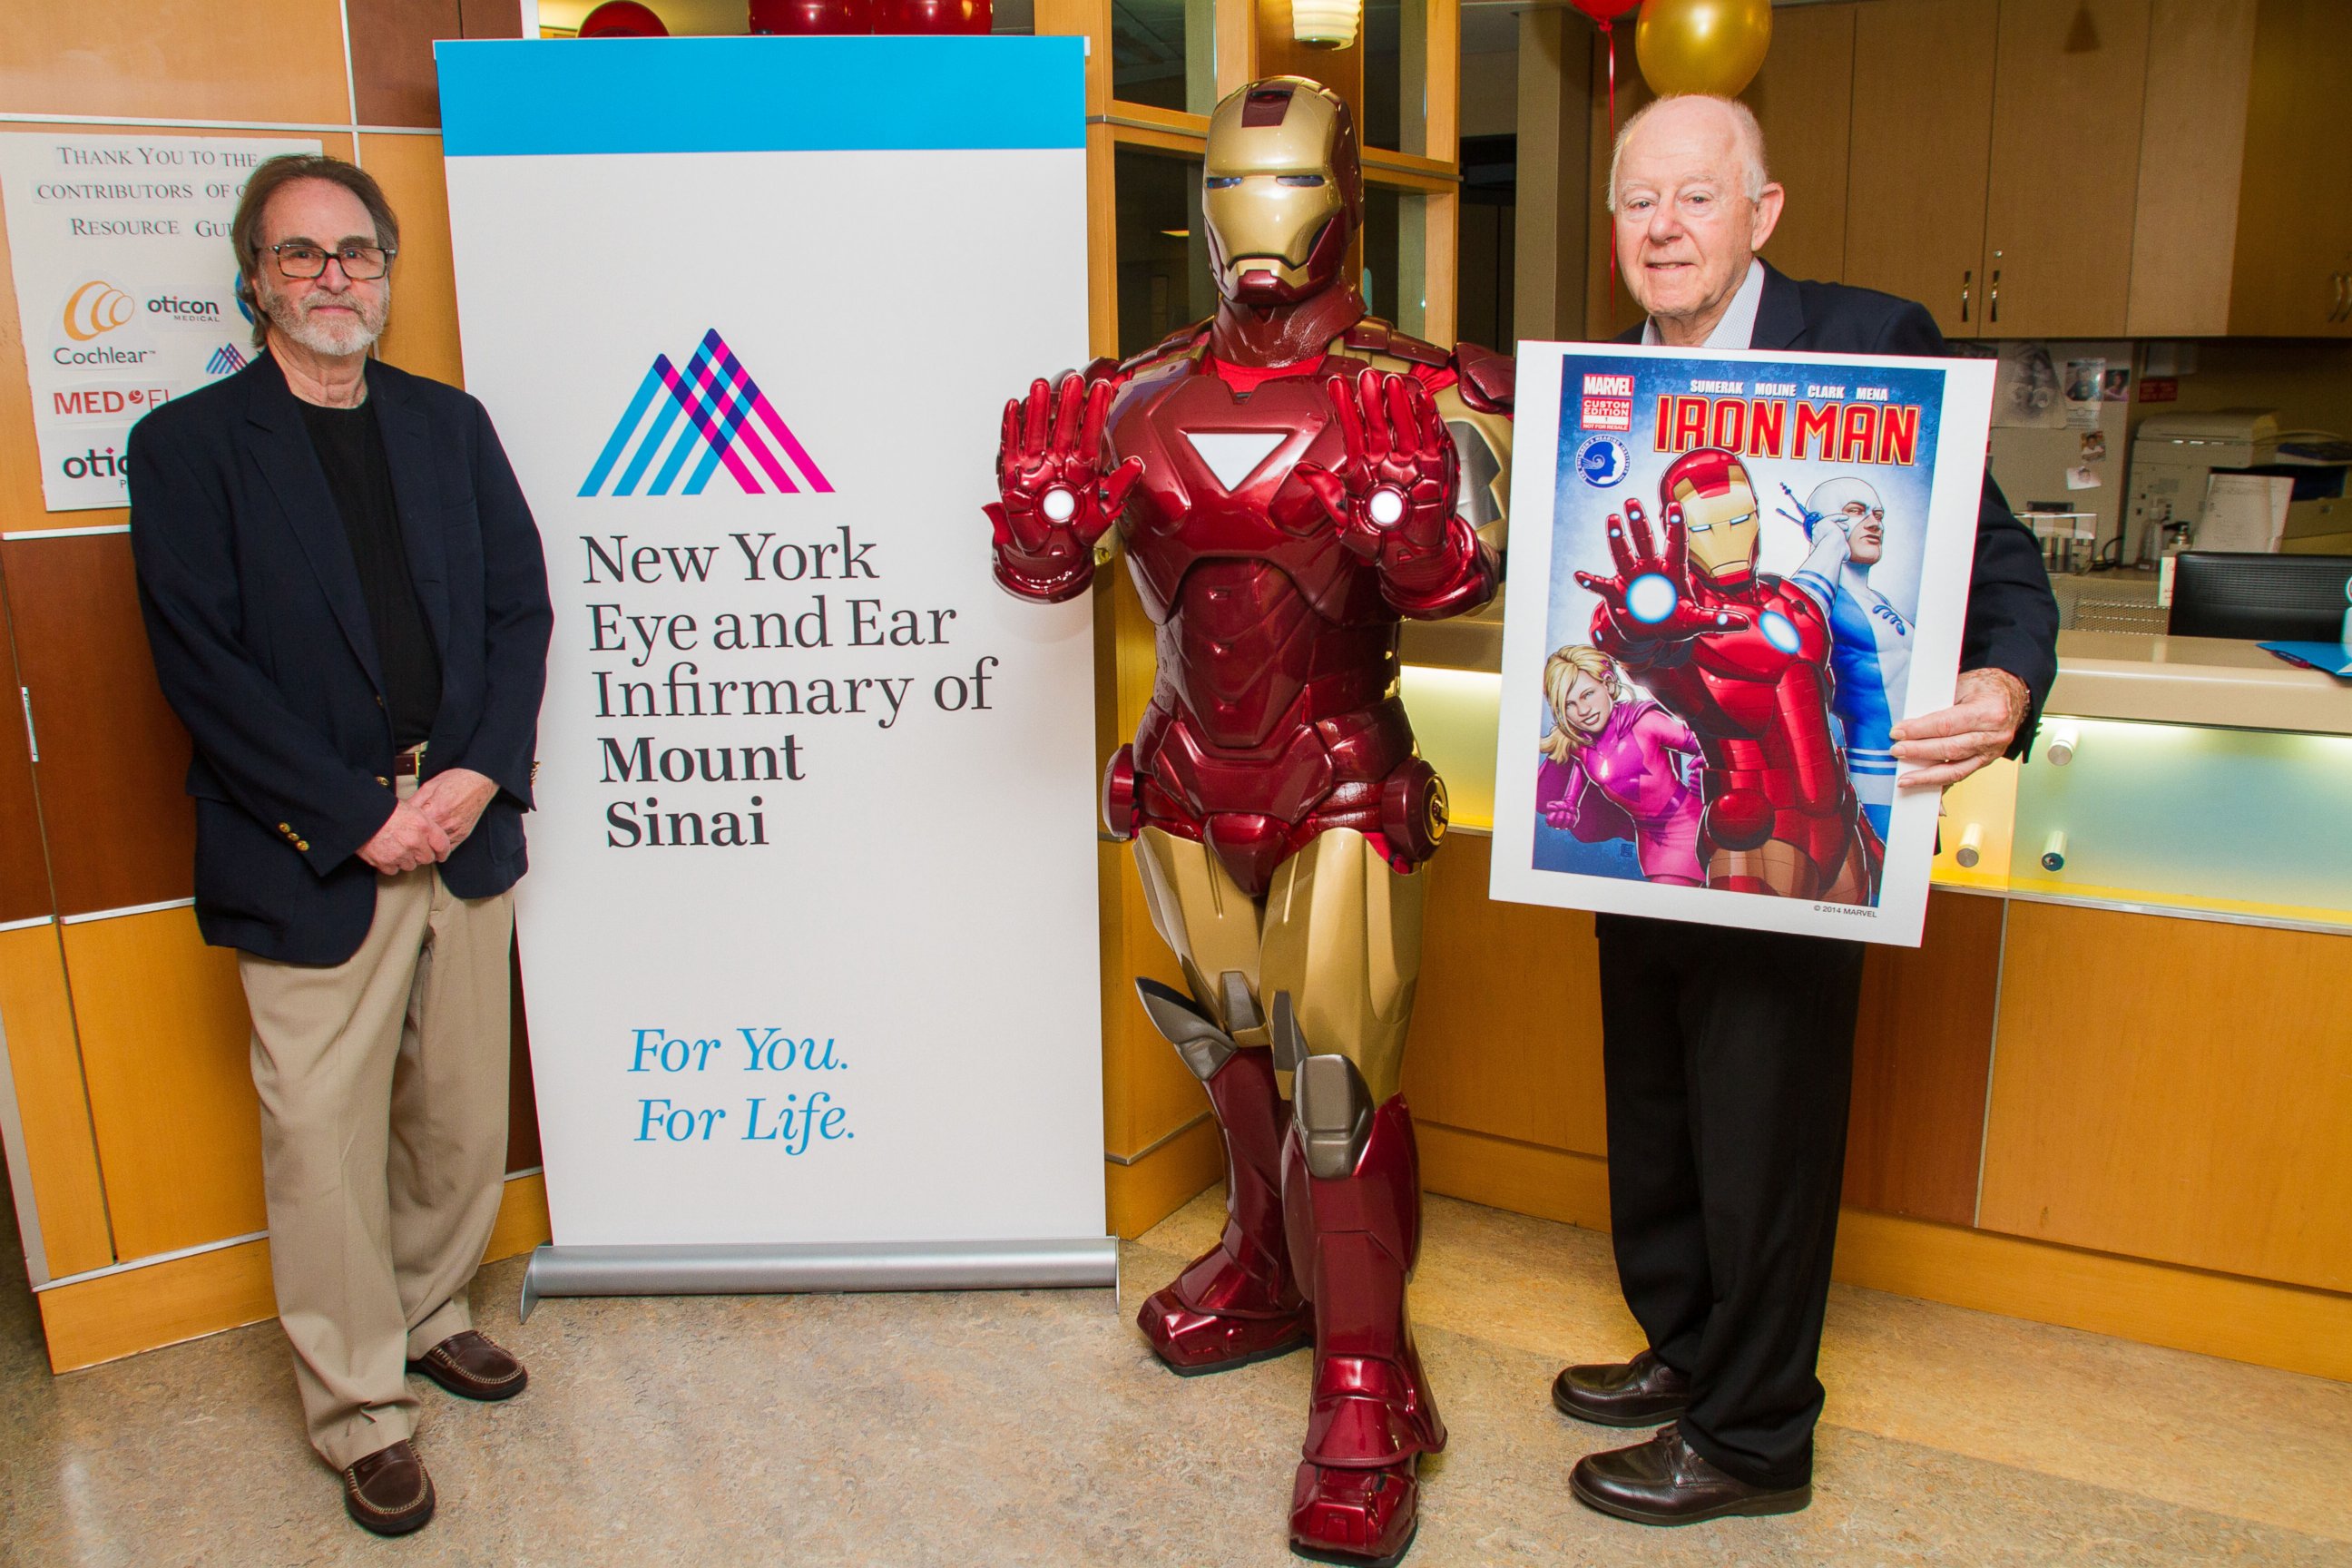 PHOTO: The Children's Hearing Institute and Marvel Comics announce the new Comic Book character Sapheara at The Children's Hearing Institute's Headquarters: The Ear Institute of The New York Eye & Ear Infirmary of Mount Sinai in New York City.